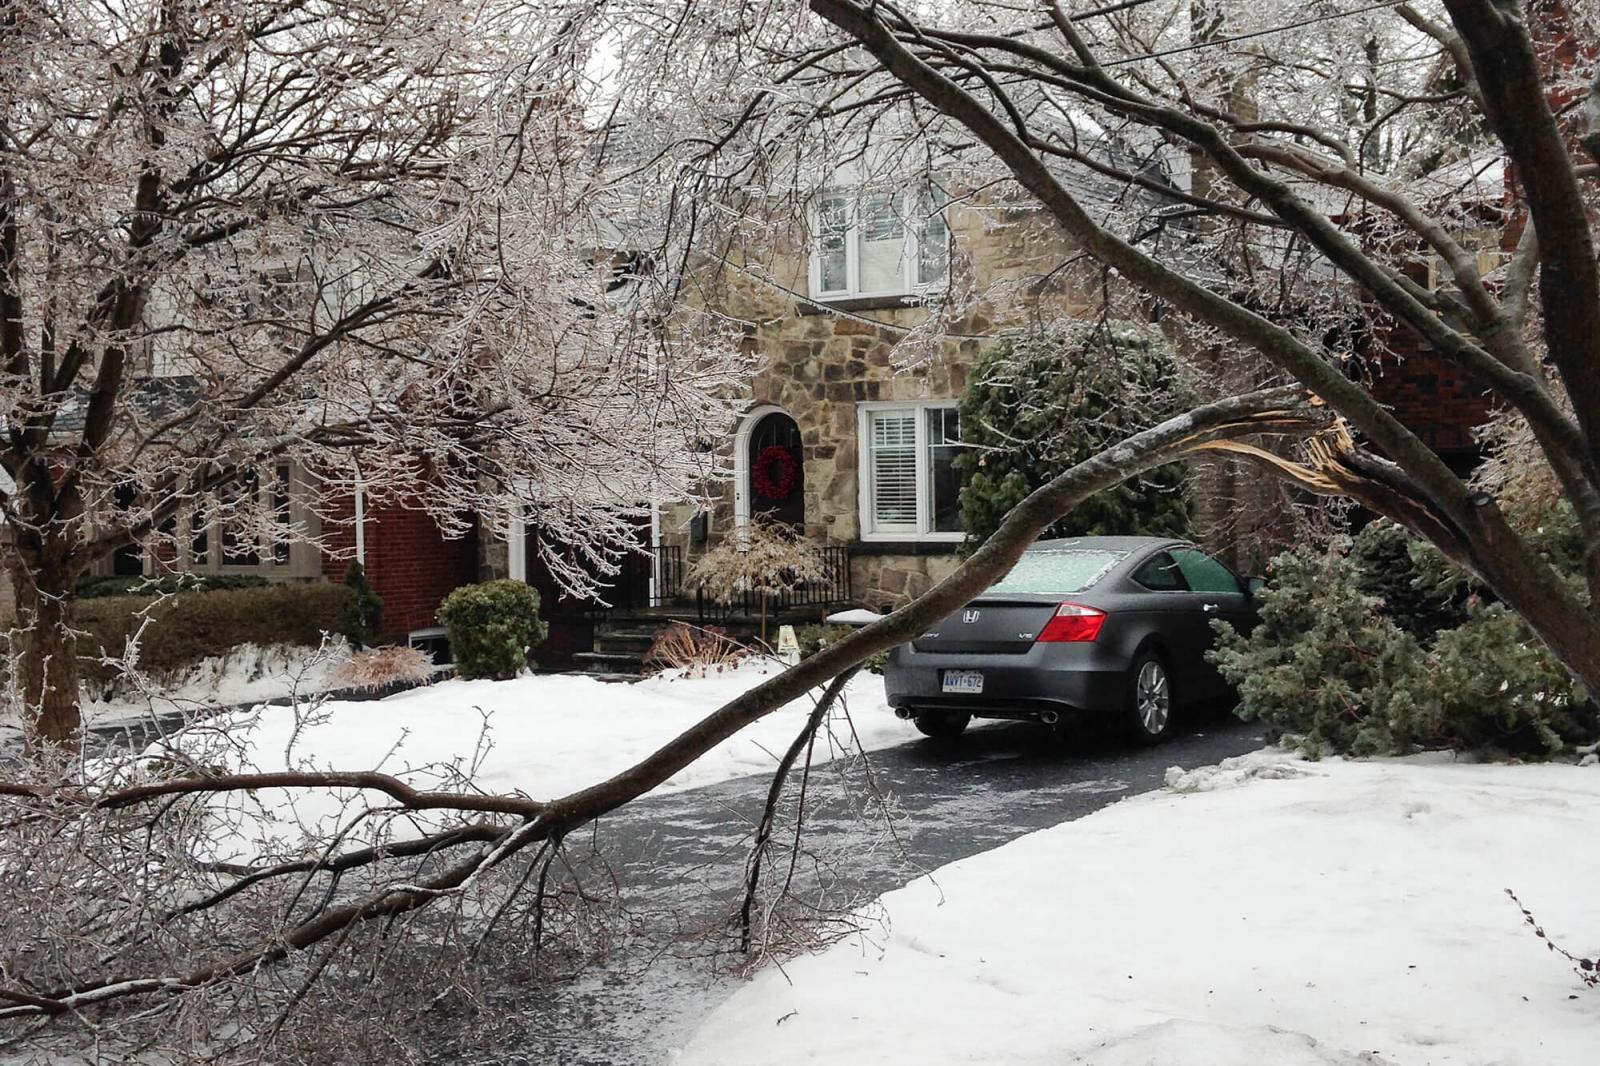 Ice storm may benefit trees